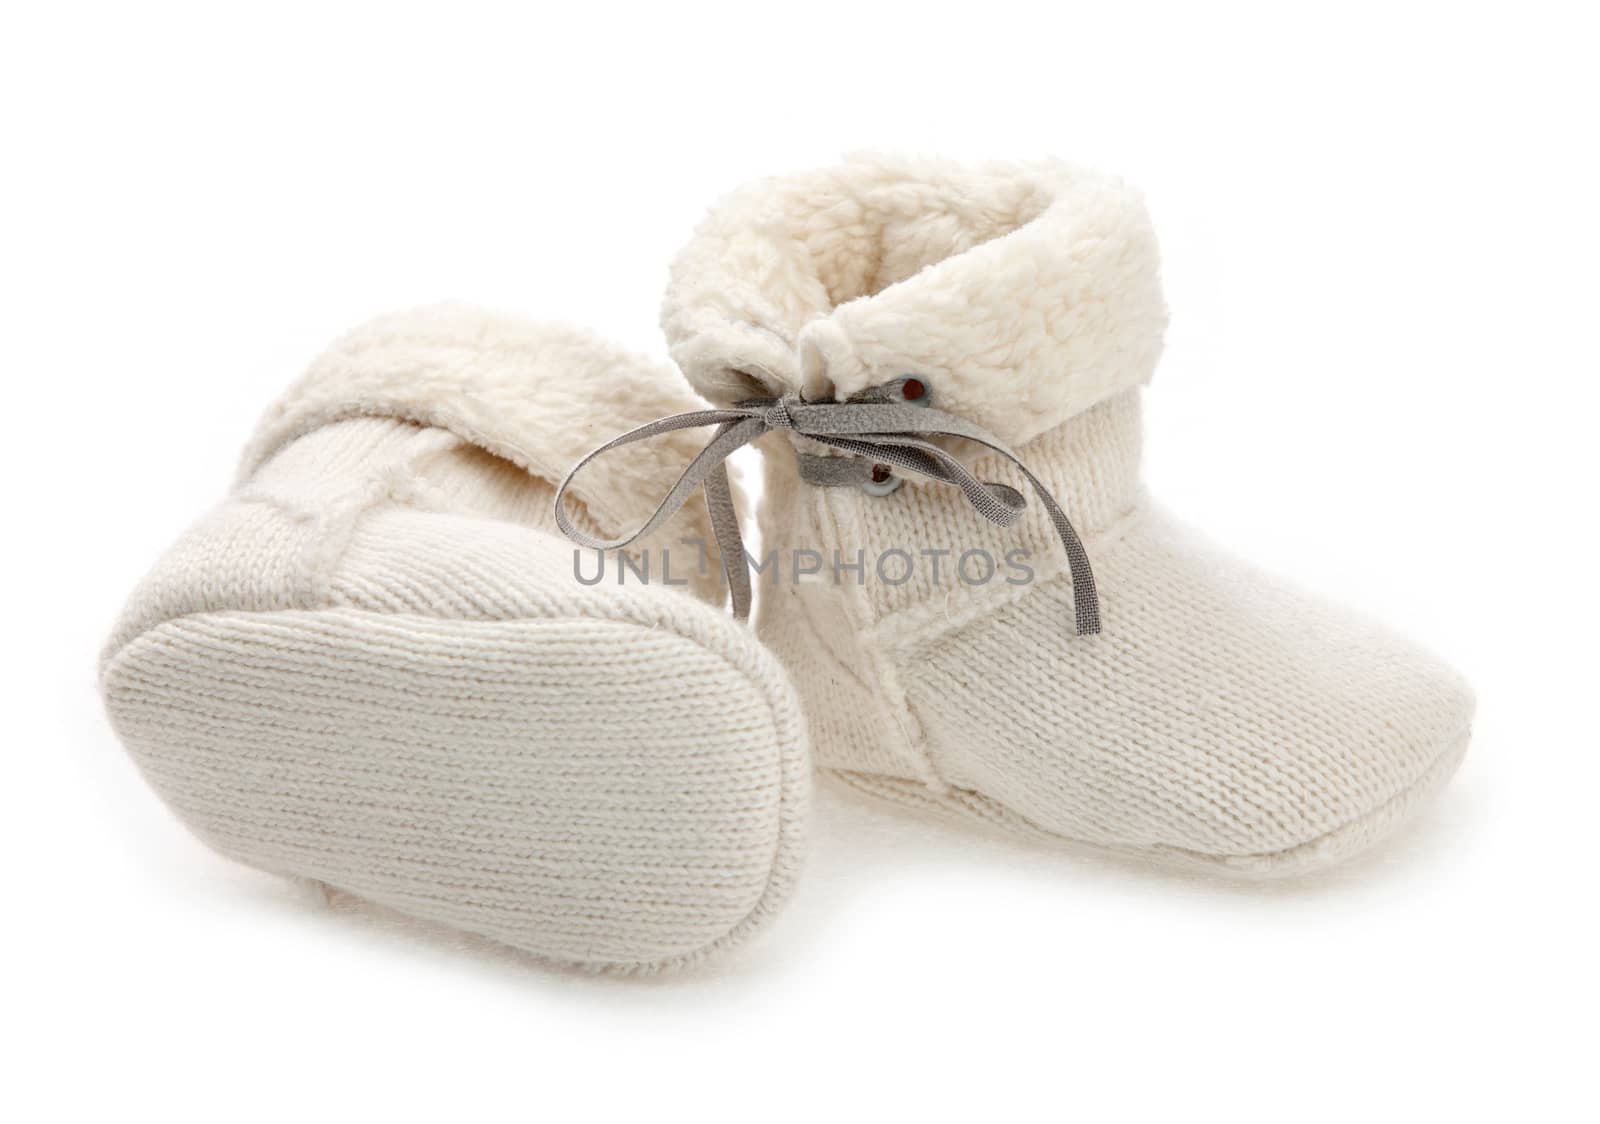 Pair of baby booties over white by photobac